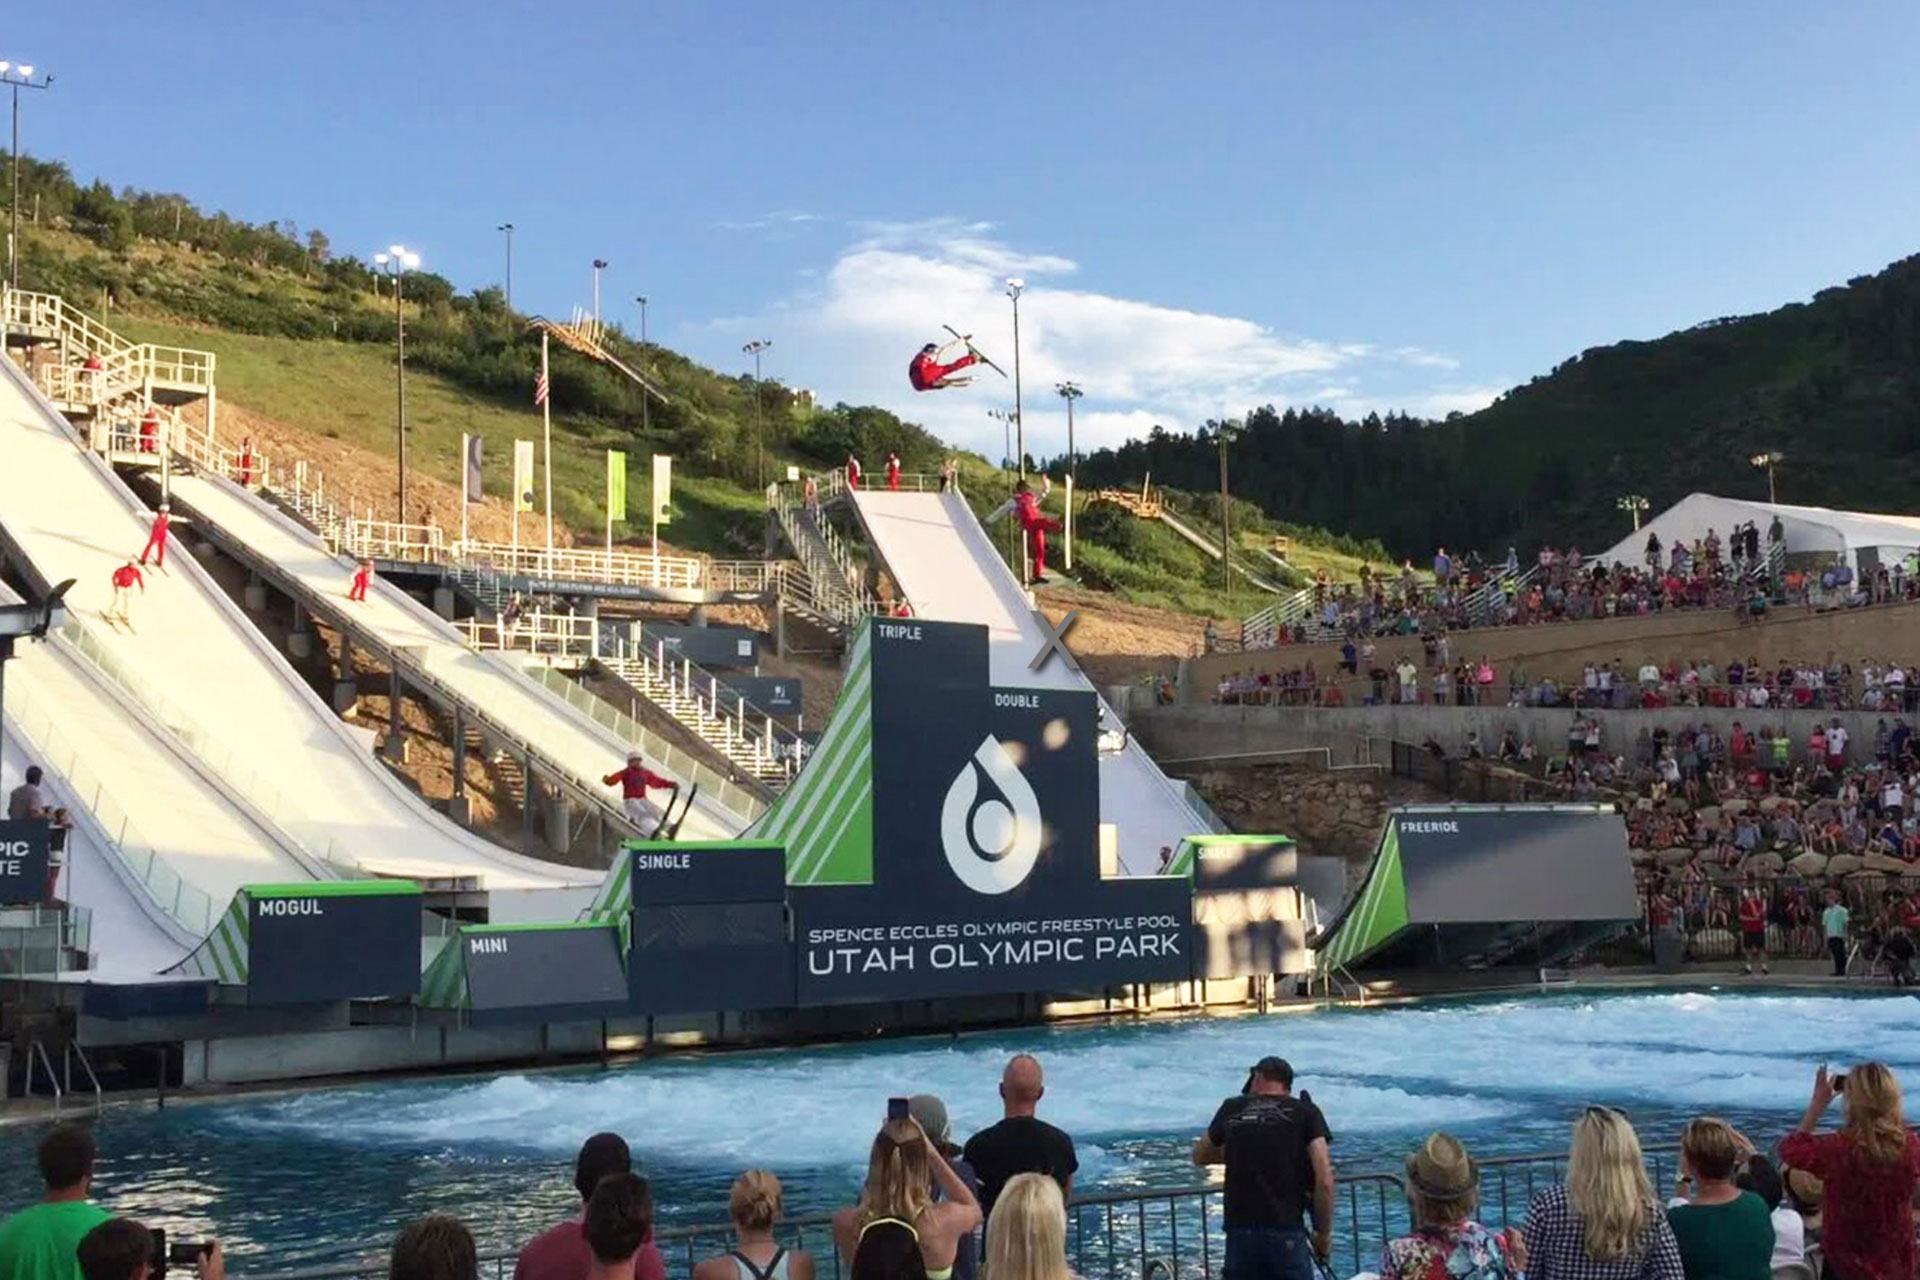 Olympic Park Utah Re-Opens for Summer with Cloud